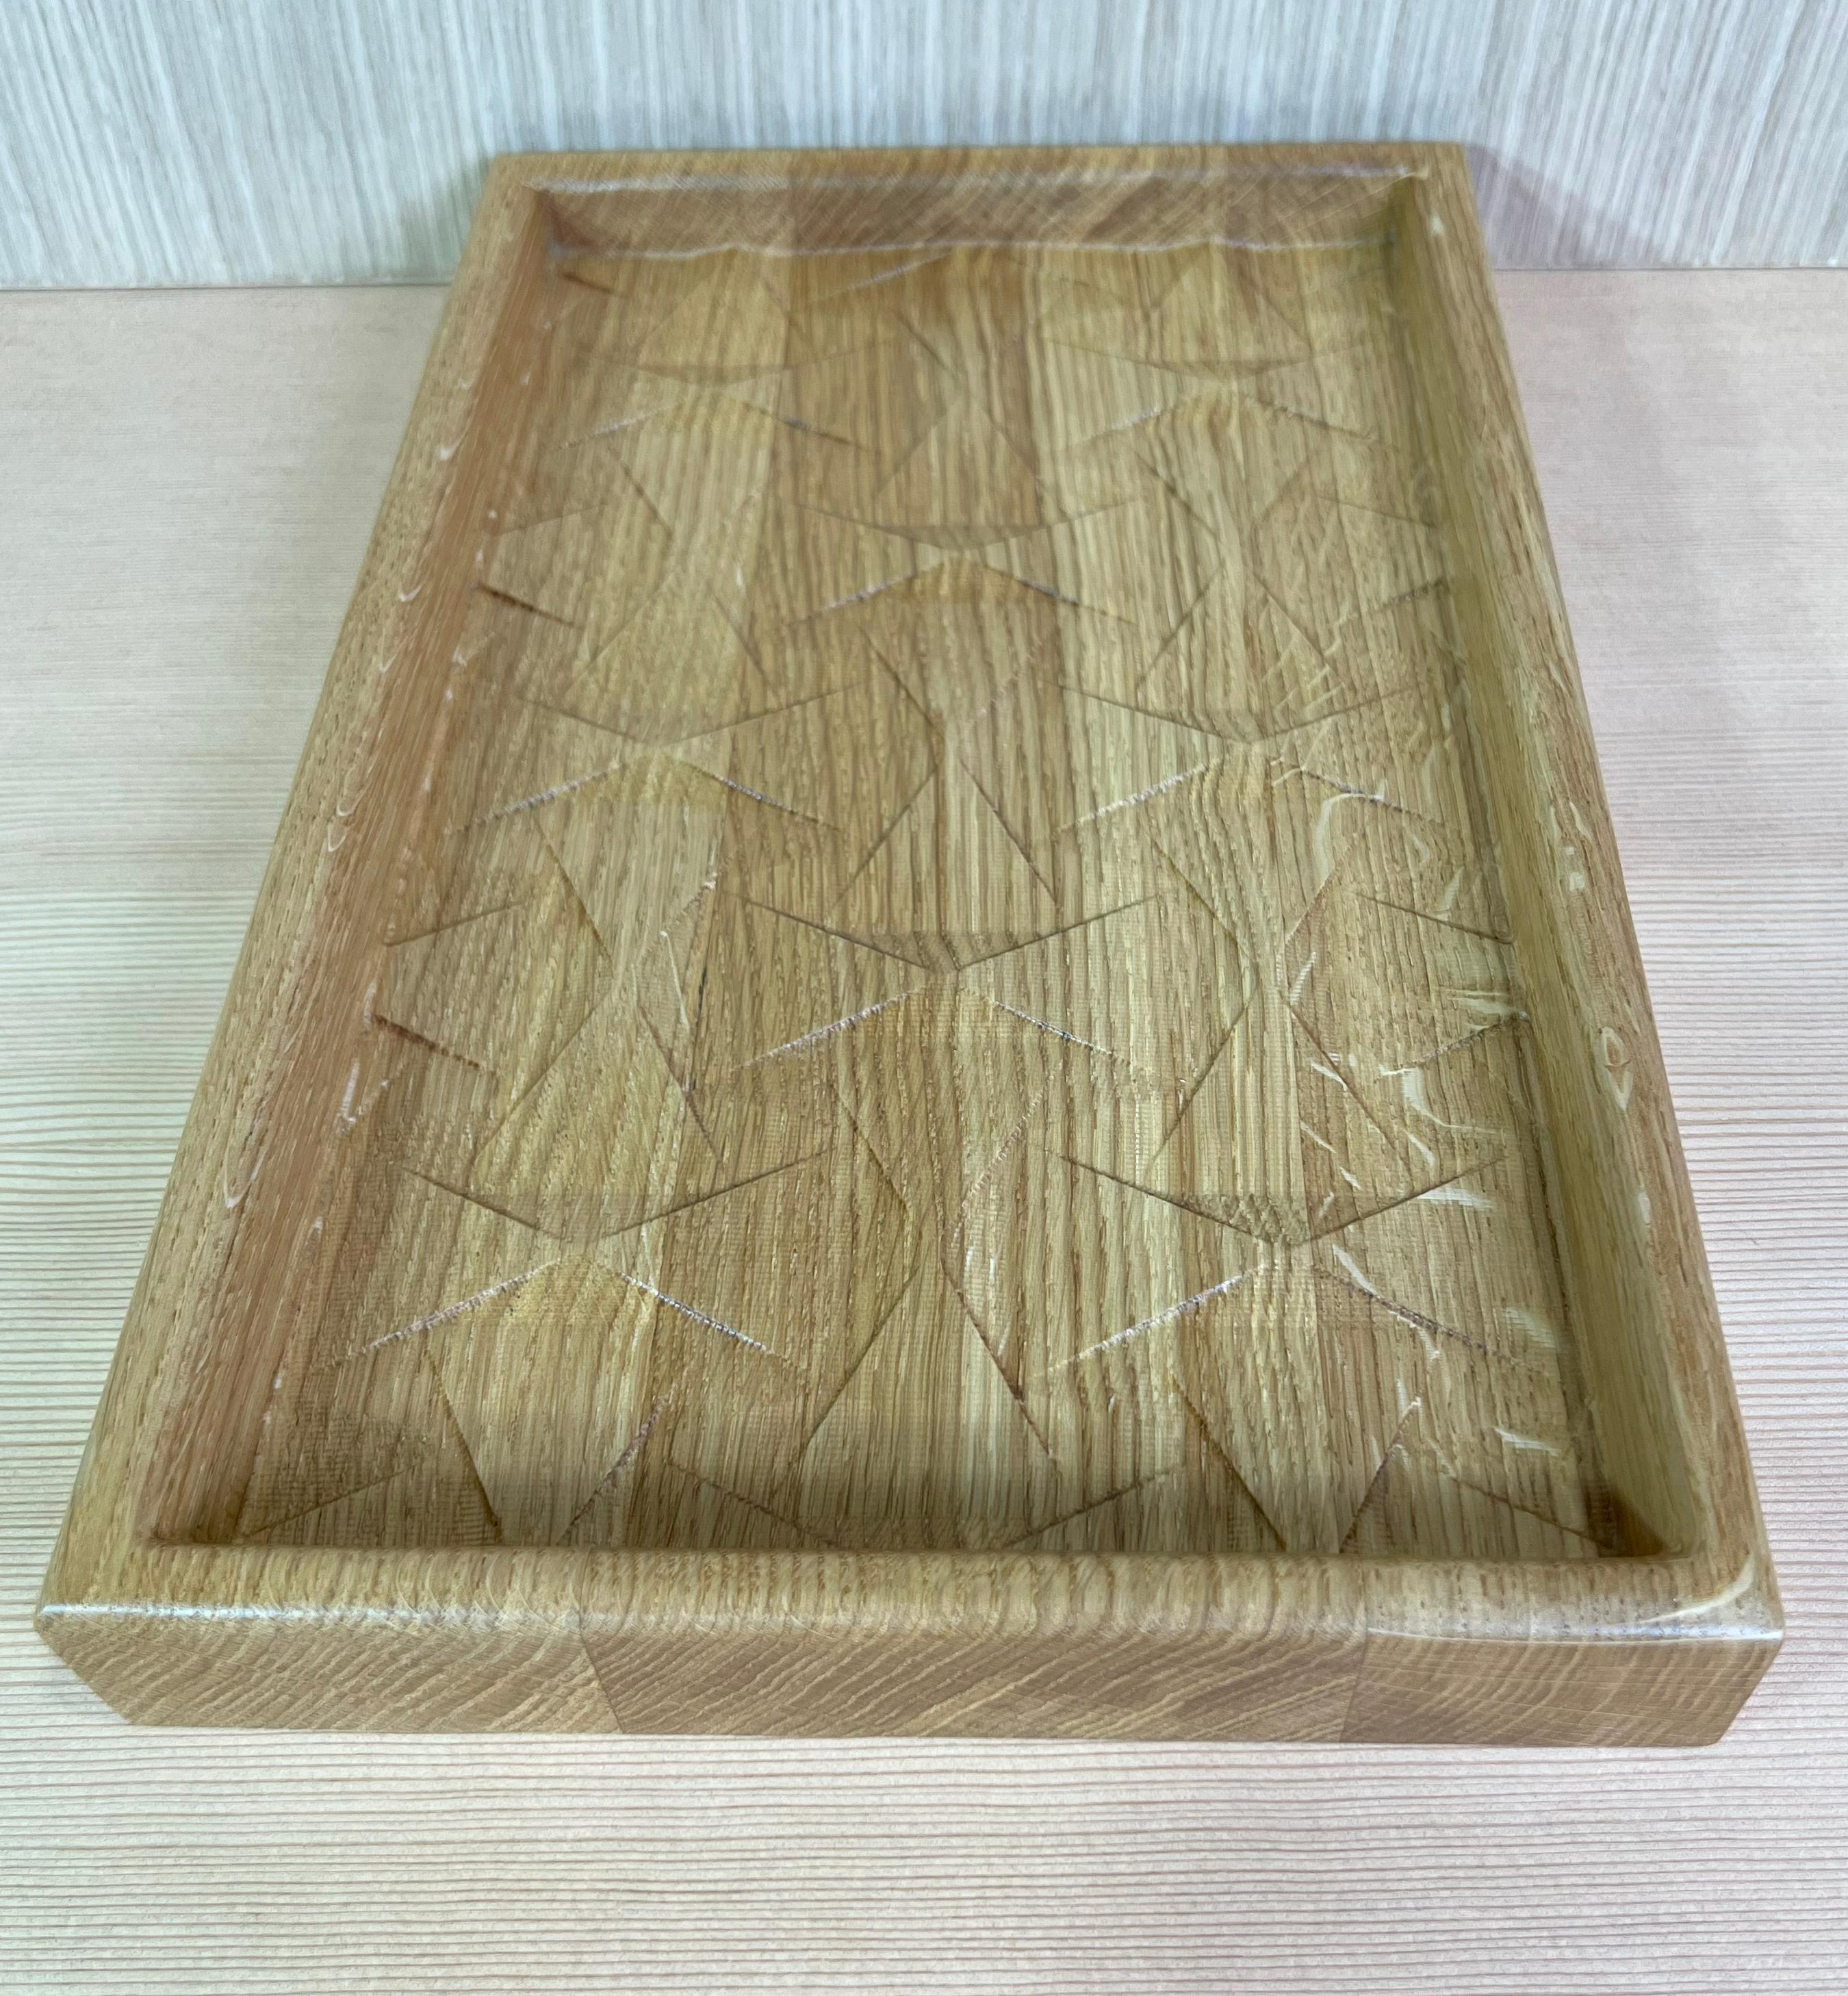 XXIe siècle et contemporain Wood Valet tray vanity tray catchall tray forhome office dresser kitchen instock en vente